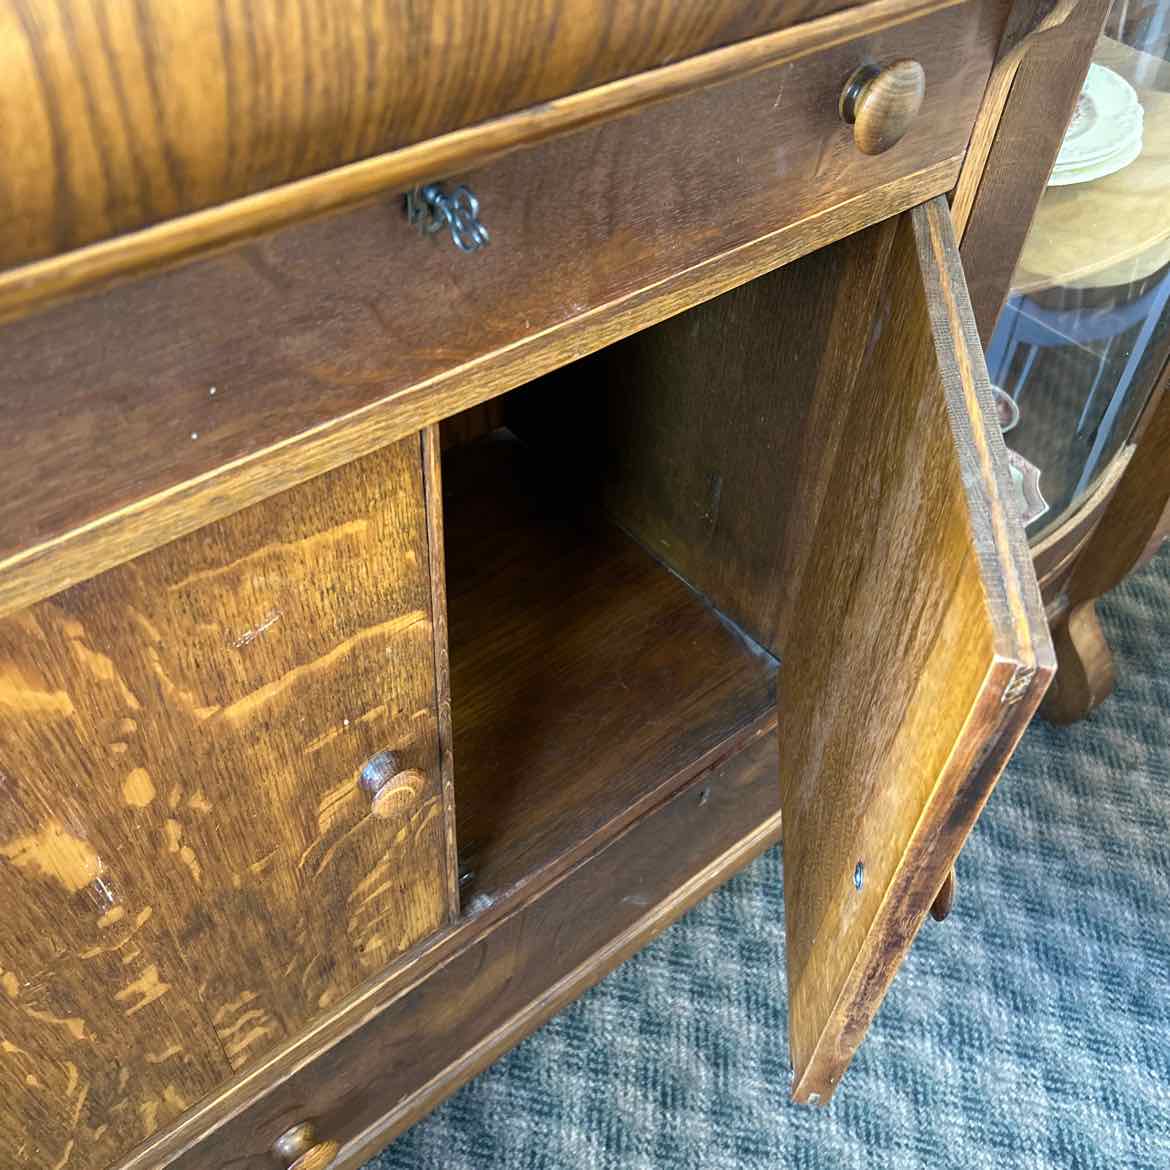 Vintage Wood & Mirror Cabinet with Wood Shelves